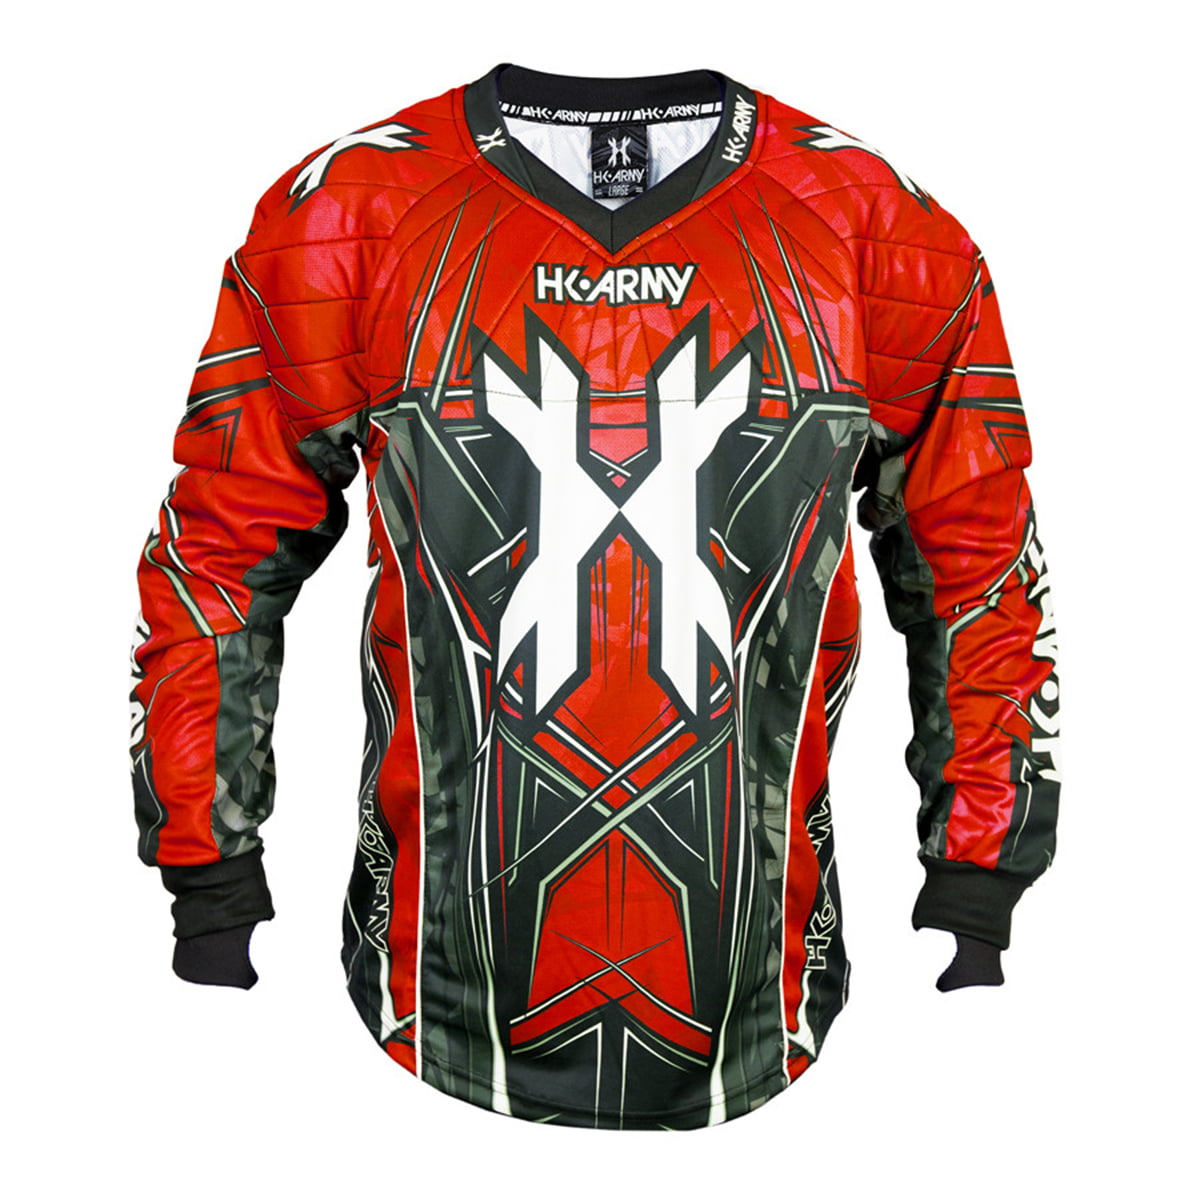 Lava Details about   HK Army HSTL Line Paintball Jersey X-Large 